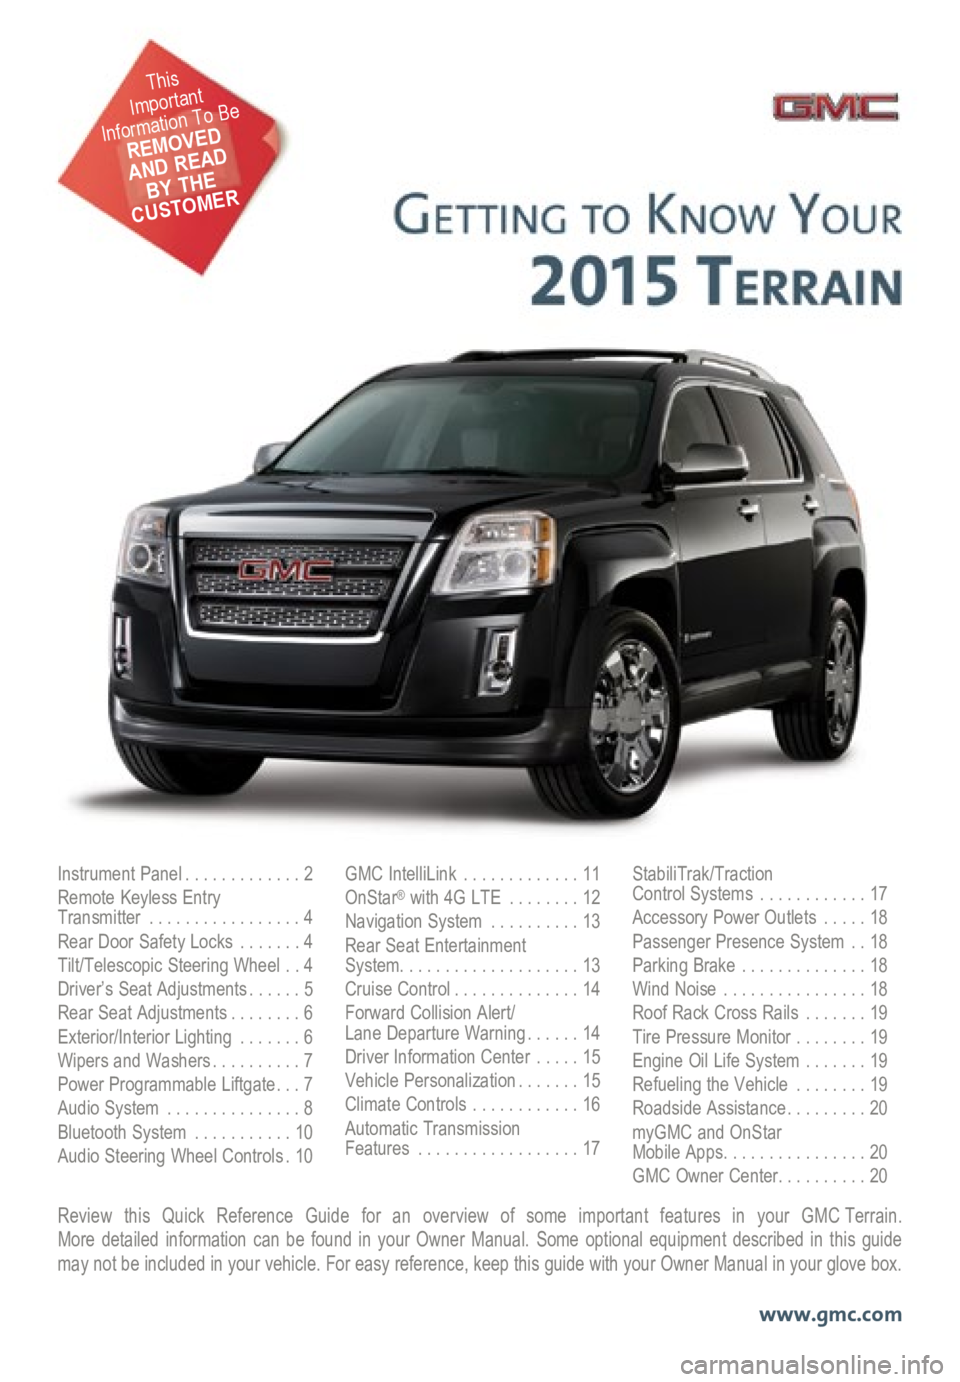 GMC TERRAIN 2015  Get To Know Guide Review this Quick Reference Guide for an overview of some important features in your GMC Terrain.  More detailed information can be found in your Owner Manual. Some option\
al equipment described in t